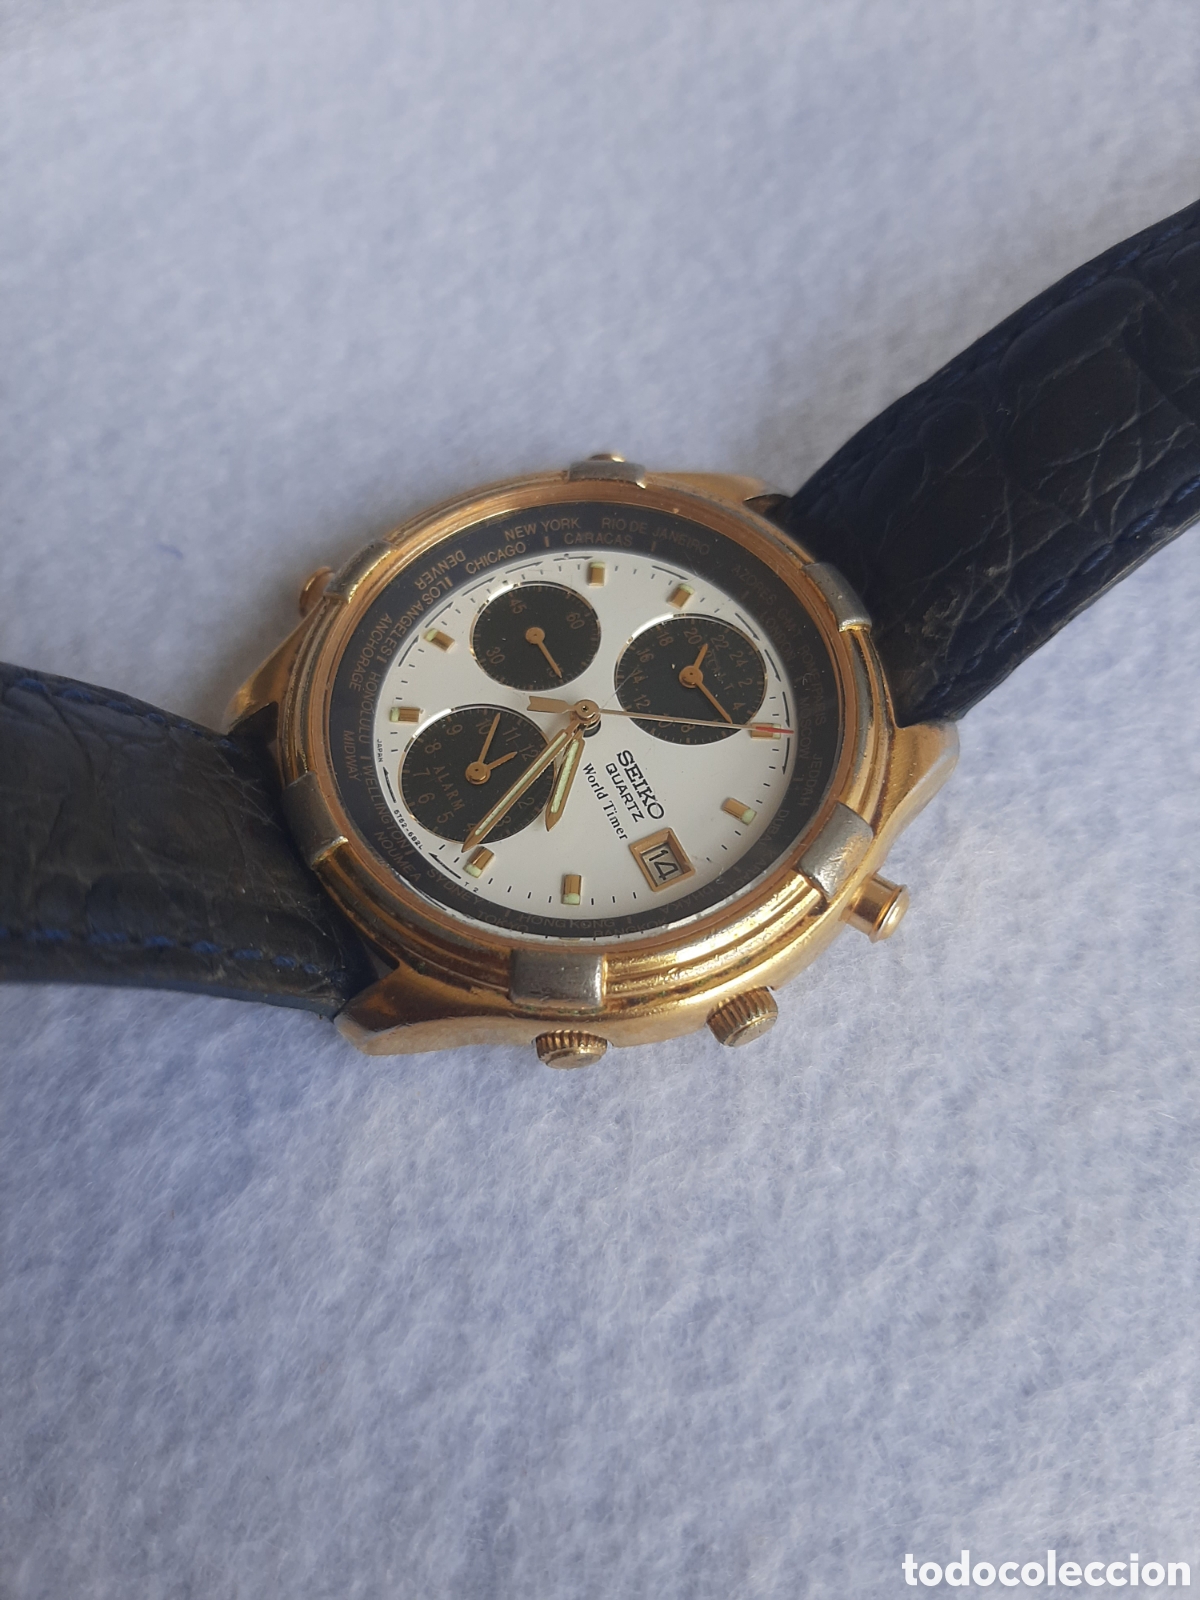 reloj seiko world timer panda 5t52 - Buy Antique wristwatches with manual  charge on todocoleccion